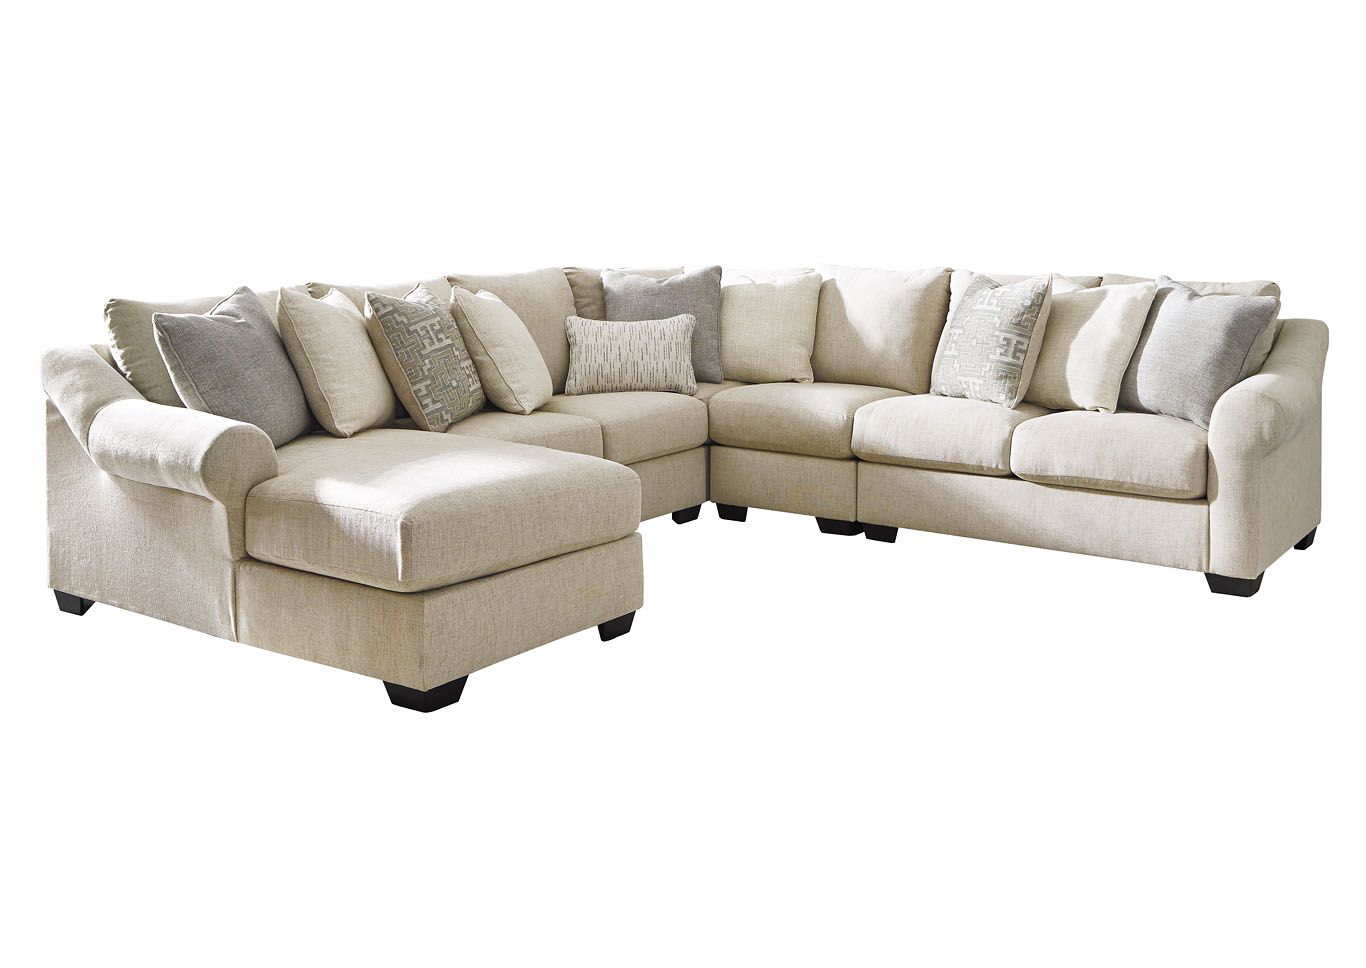 Carnaby 5 Piece Sectional Chaise Ashley Furniture In Setoril Modern Sectional Sofa Swith Chaise Woven Linen (View 3 of 15)